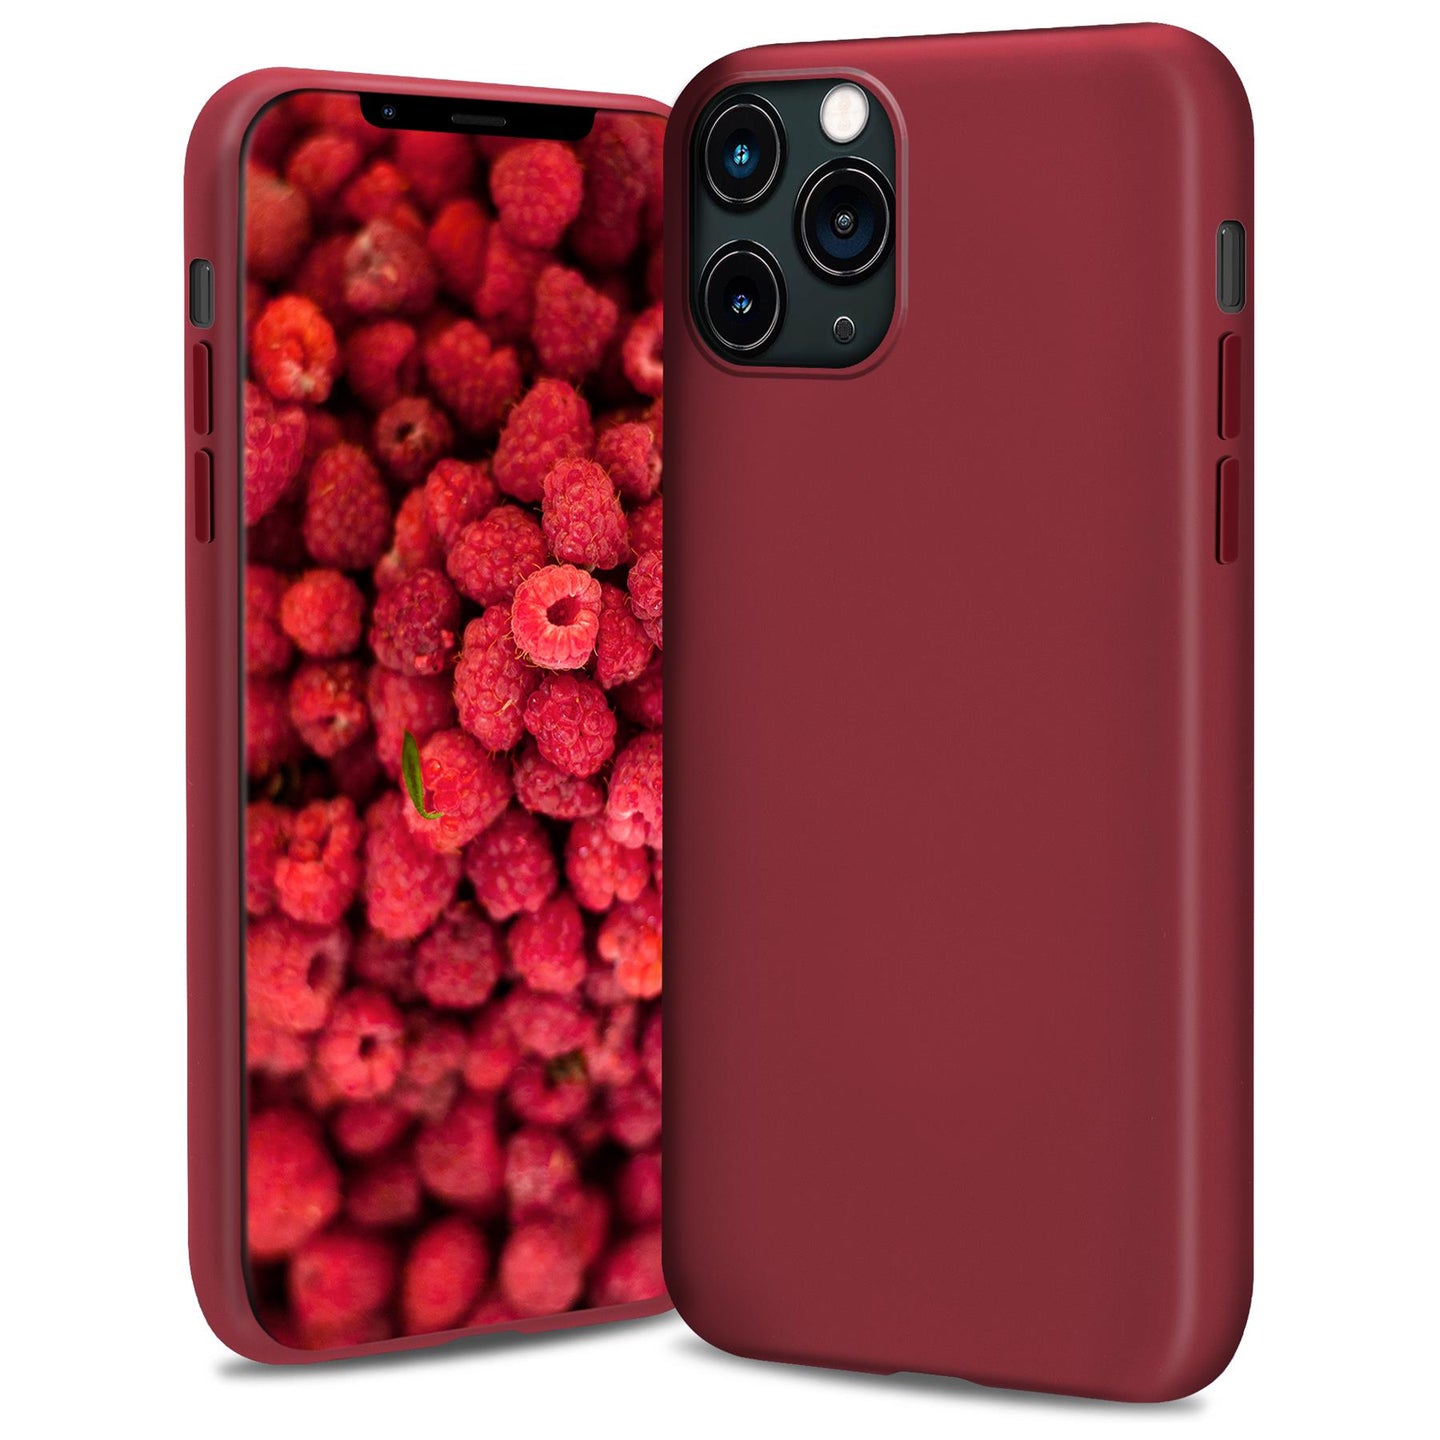 Moozy Lifestyle. Silicone Case for iPhone 13 Pro, Vintage Pink - Liquid Silicone Lightweight Cover with Matte Finish